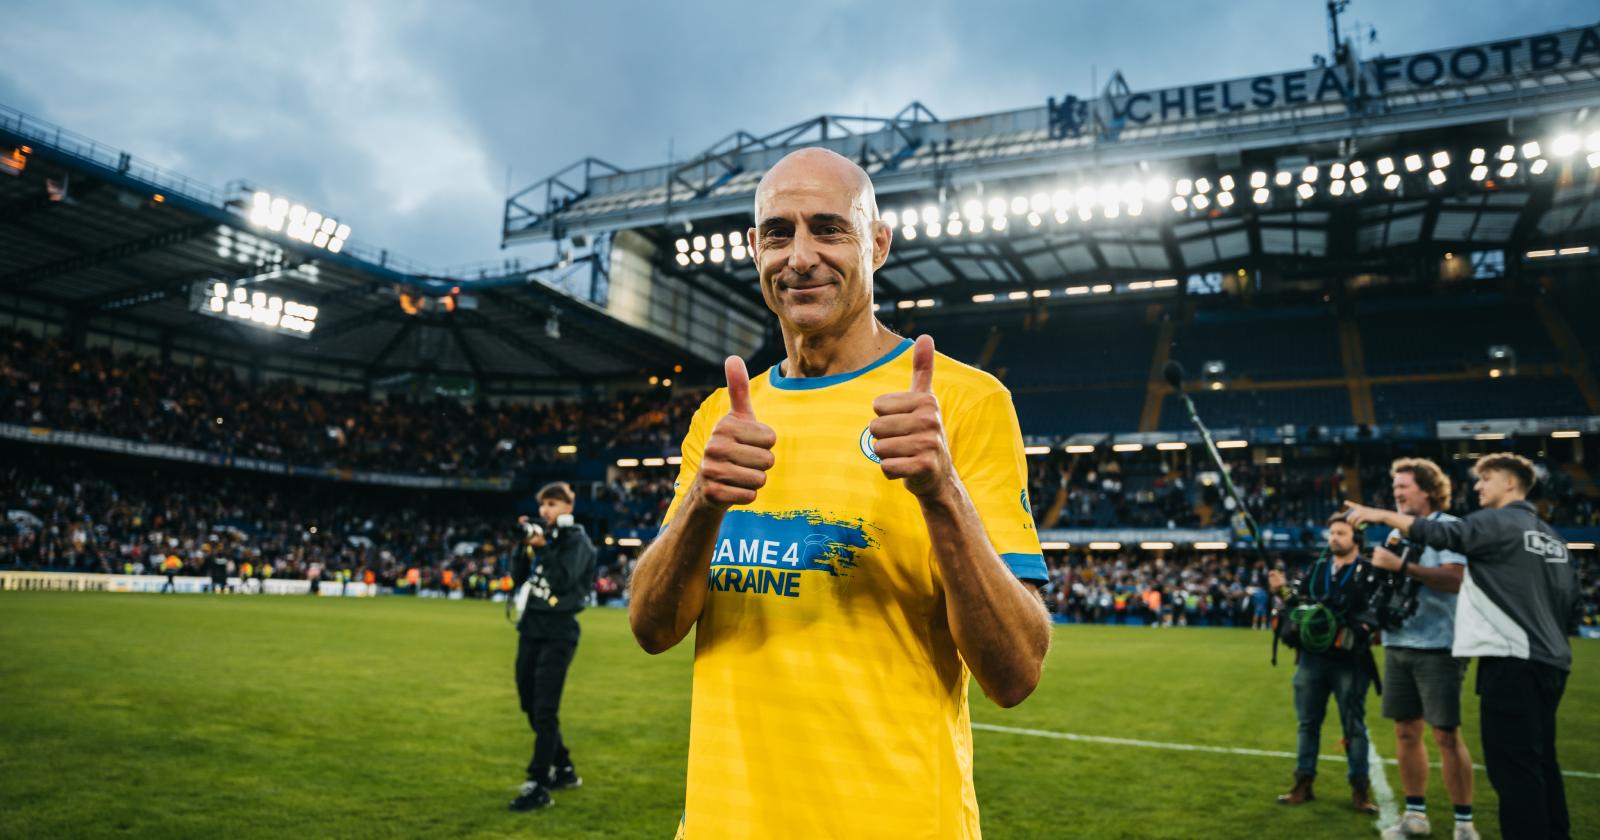 Join Mark Strong in helping protect Ukrainian children!